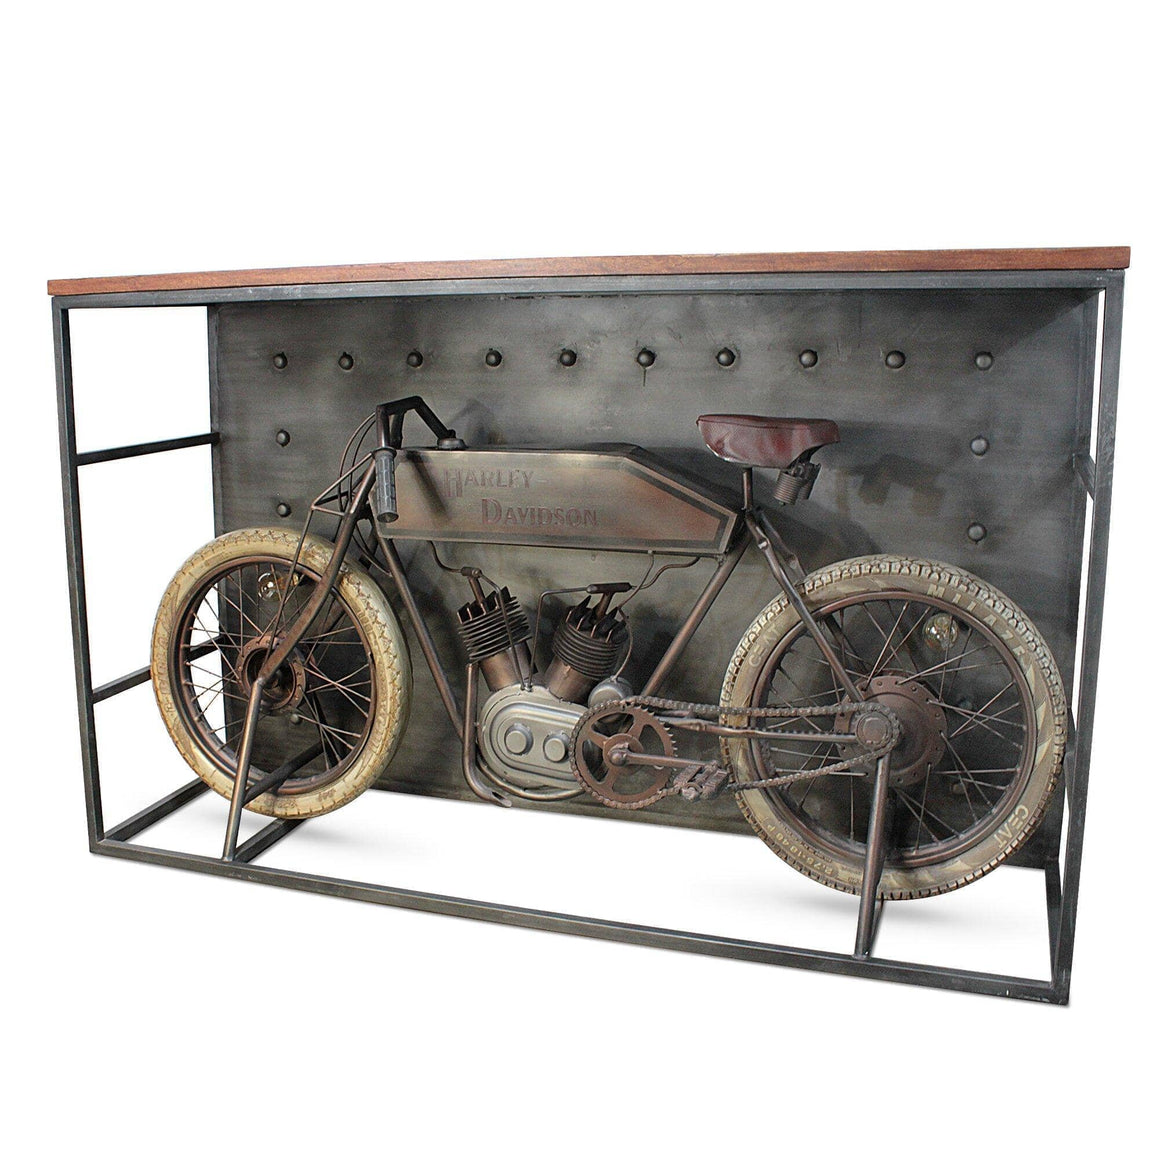 Harley Davidson Antique Motorcycle Bike Bar Pub Table - Lighted Accent - Rustic Deco Incorporated